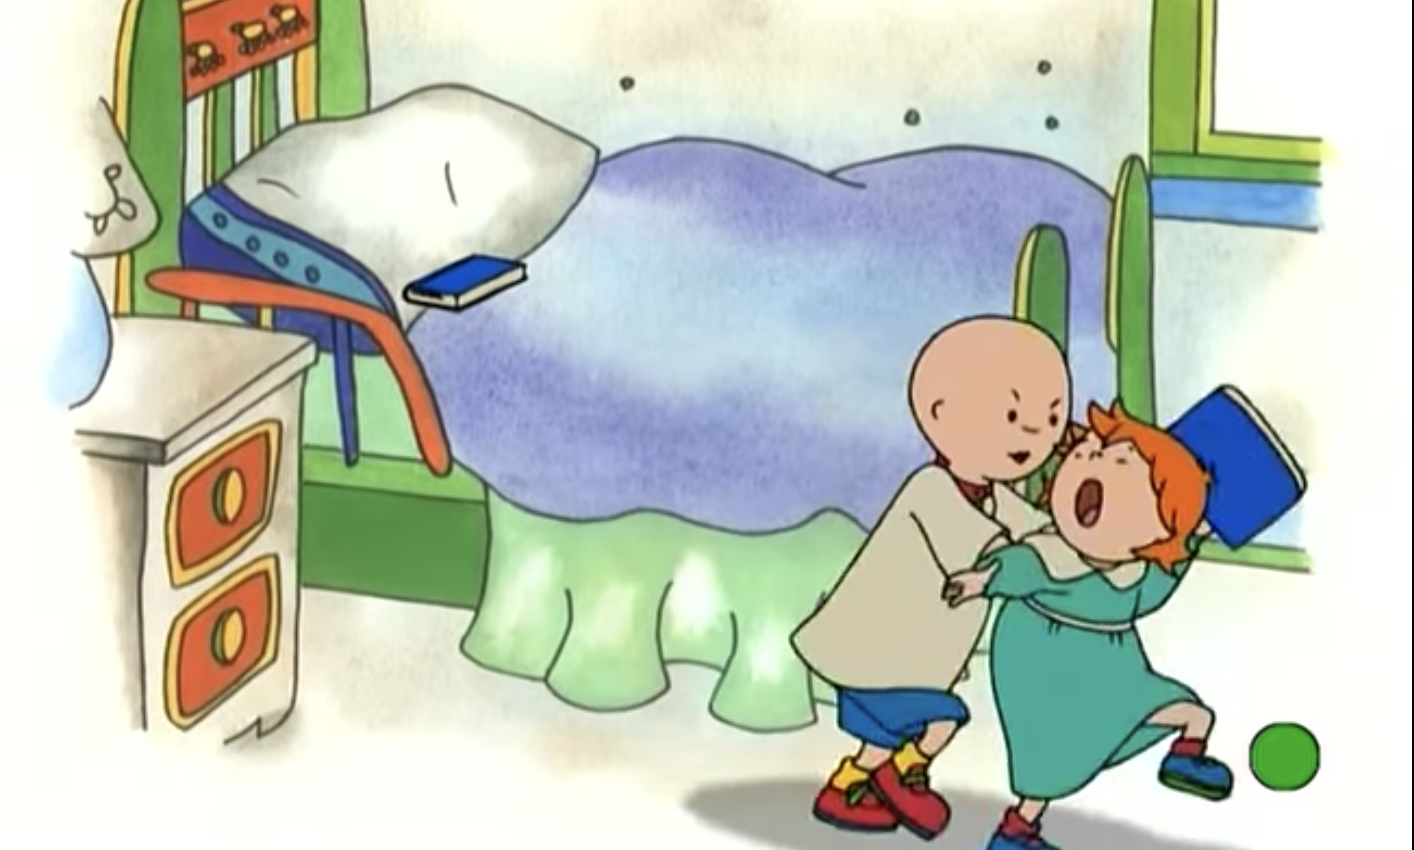 "Rosie Bothers Caillou". 